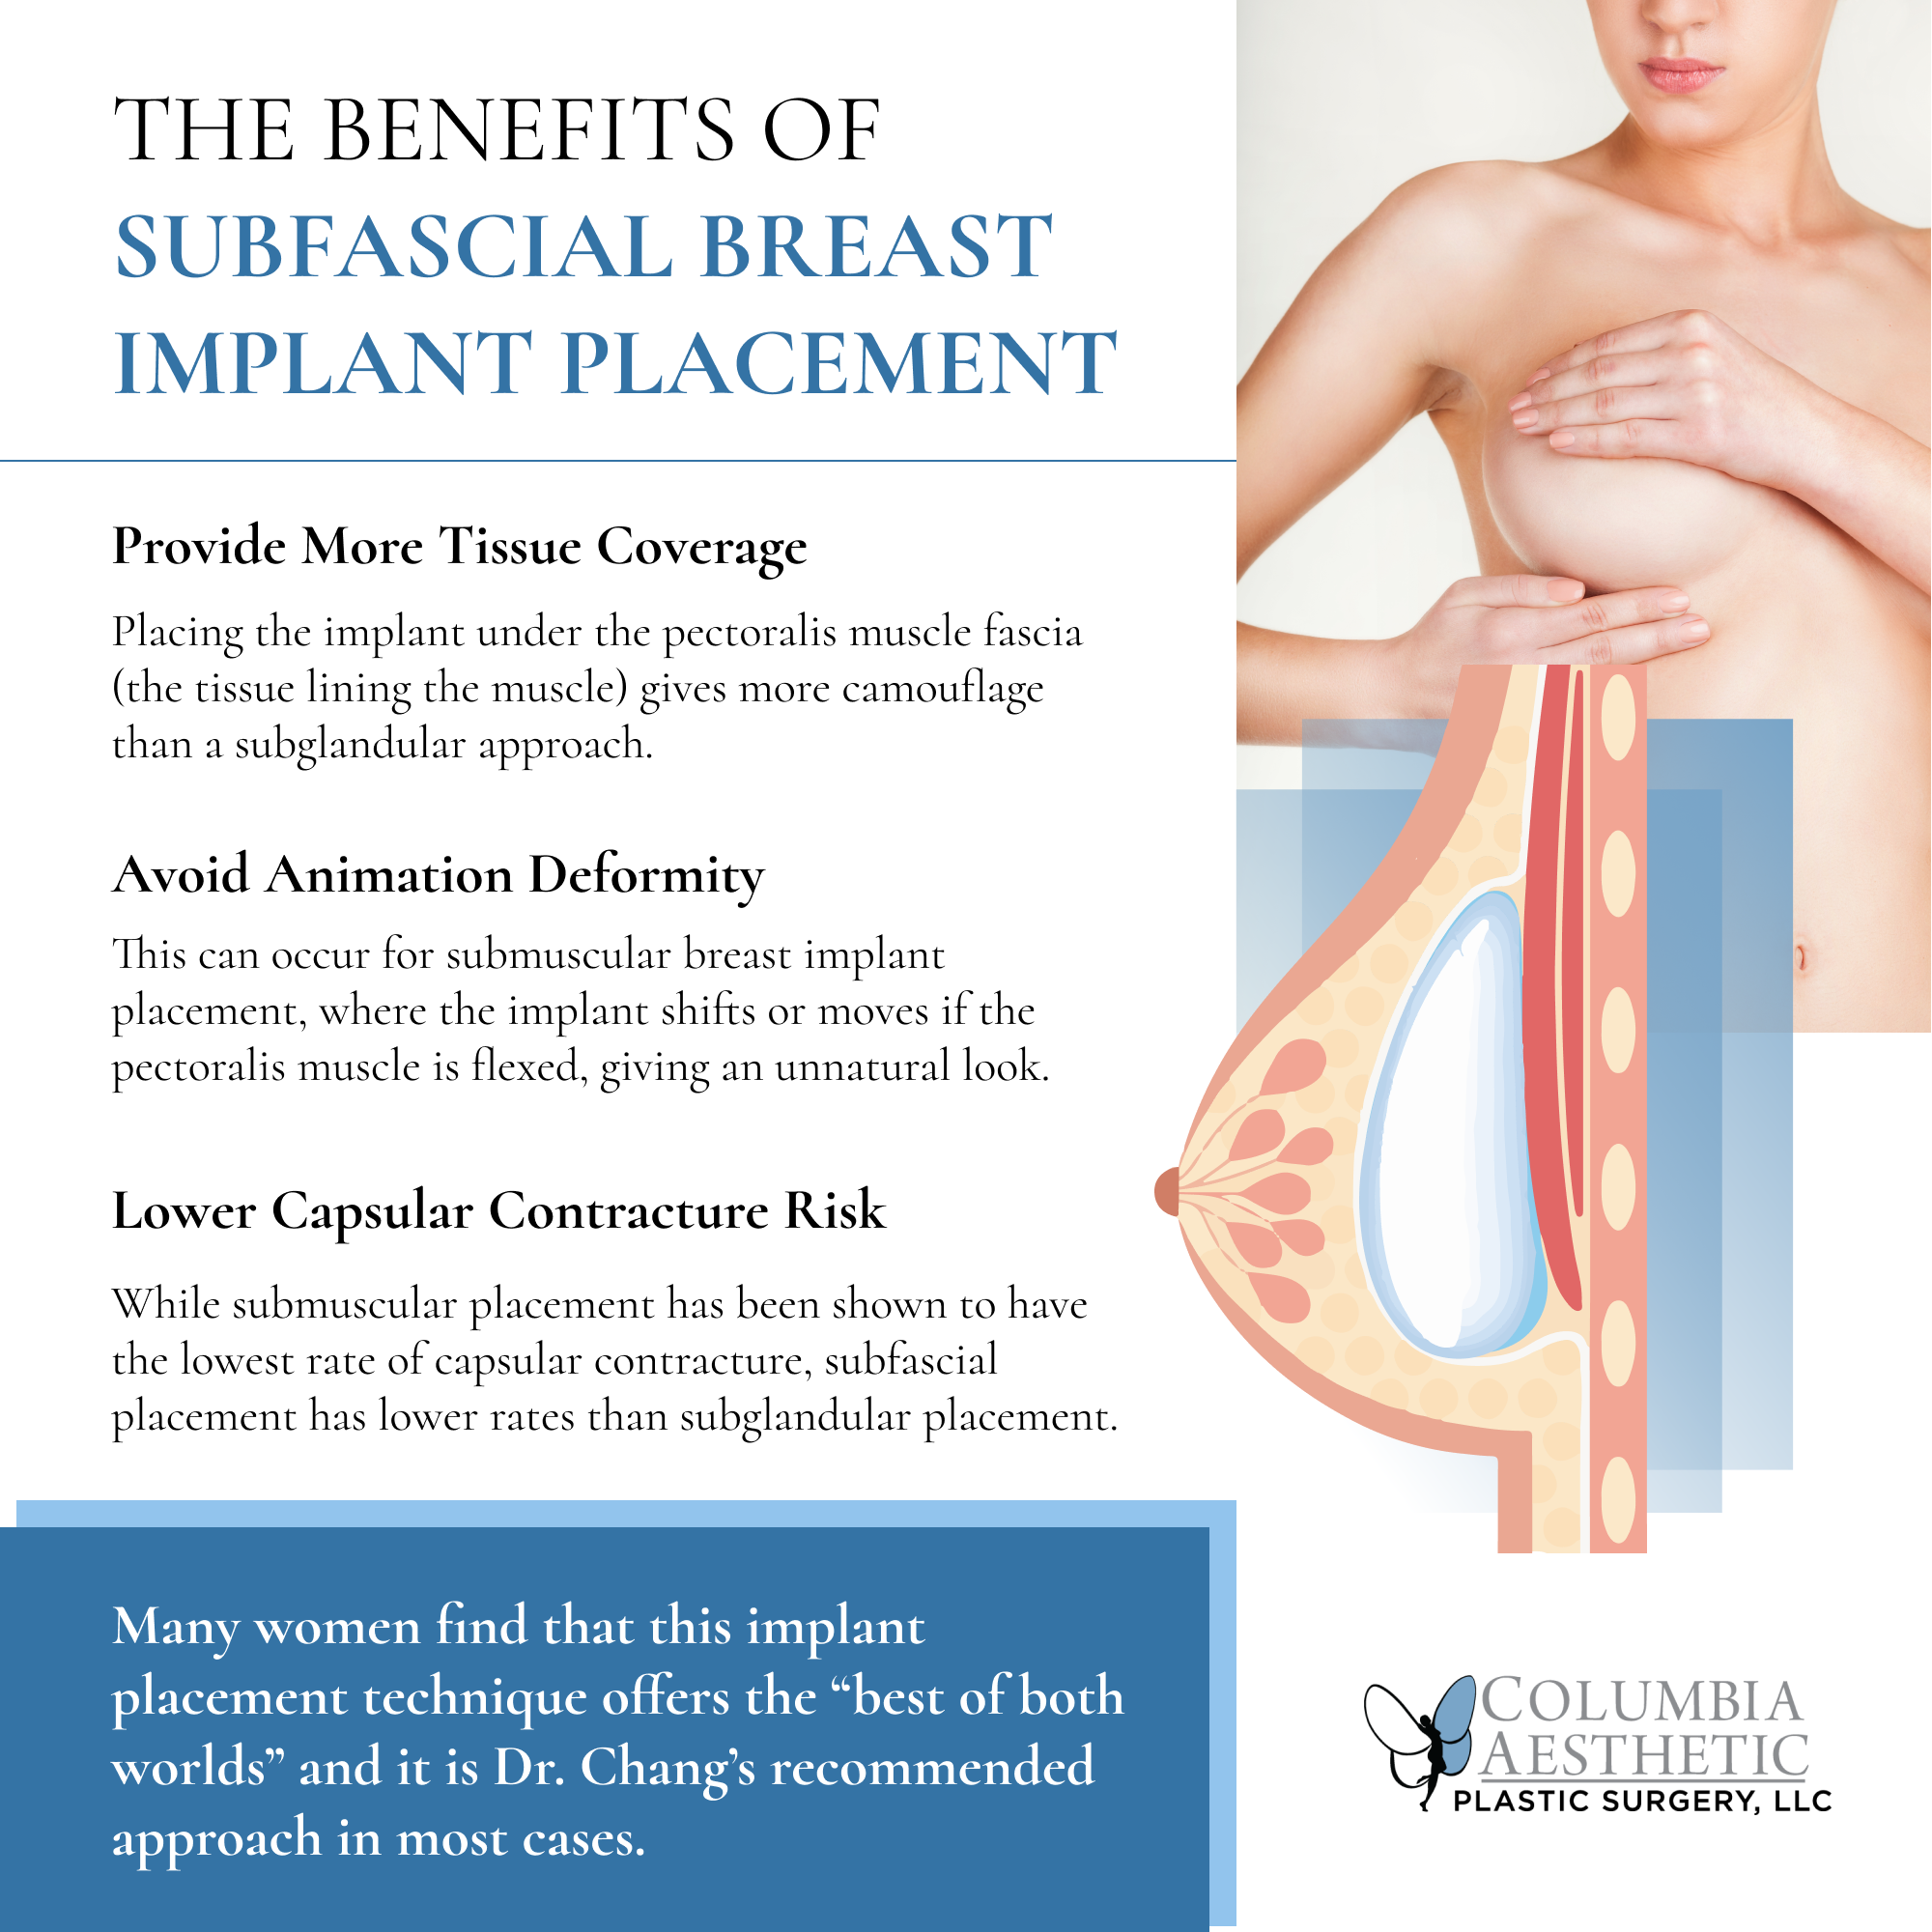 THE BENEFITS OF SUBFASCIAL BREAST IMPLANT PLACEMENT